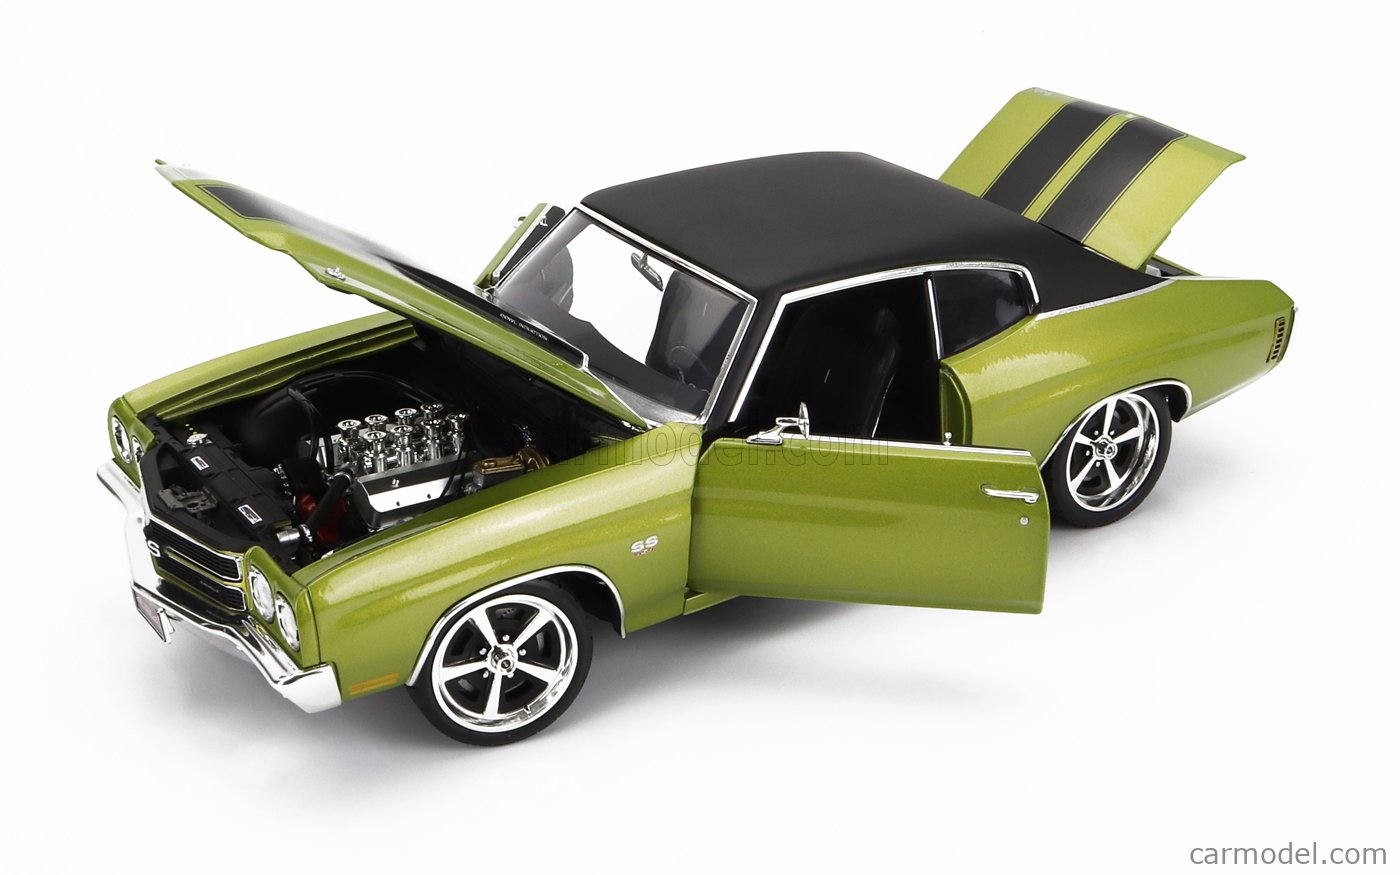 CHEVROLET - CHEVELLE SS COUPE RESTOMOD WITH VINYL TOP 1970